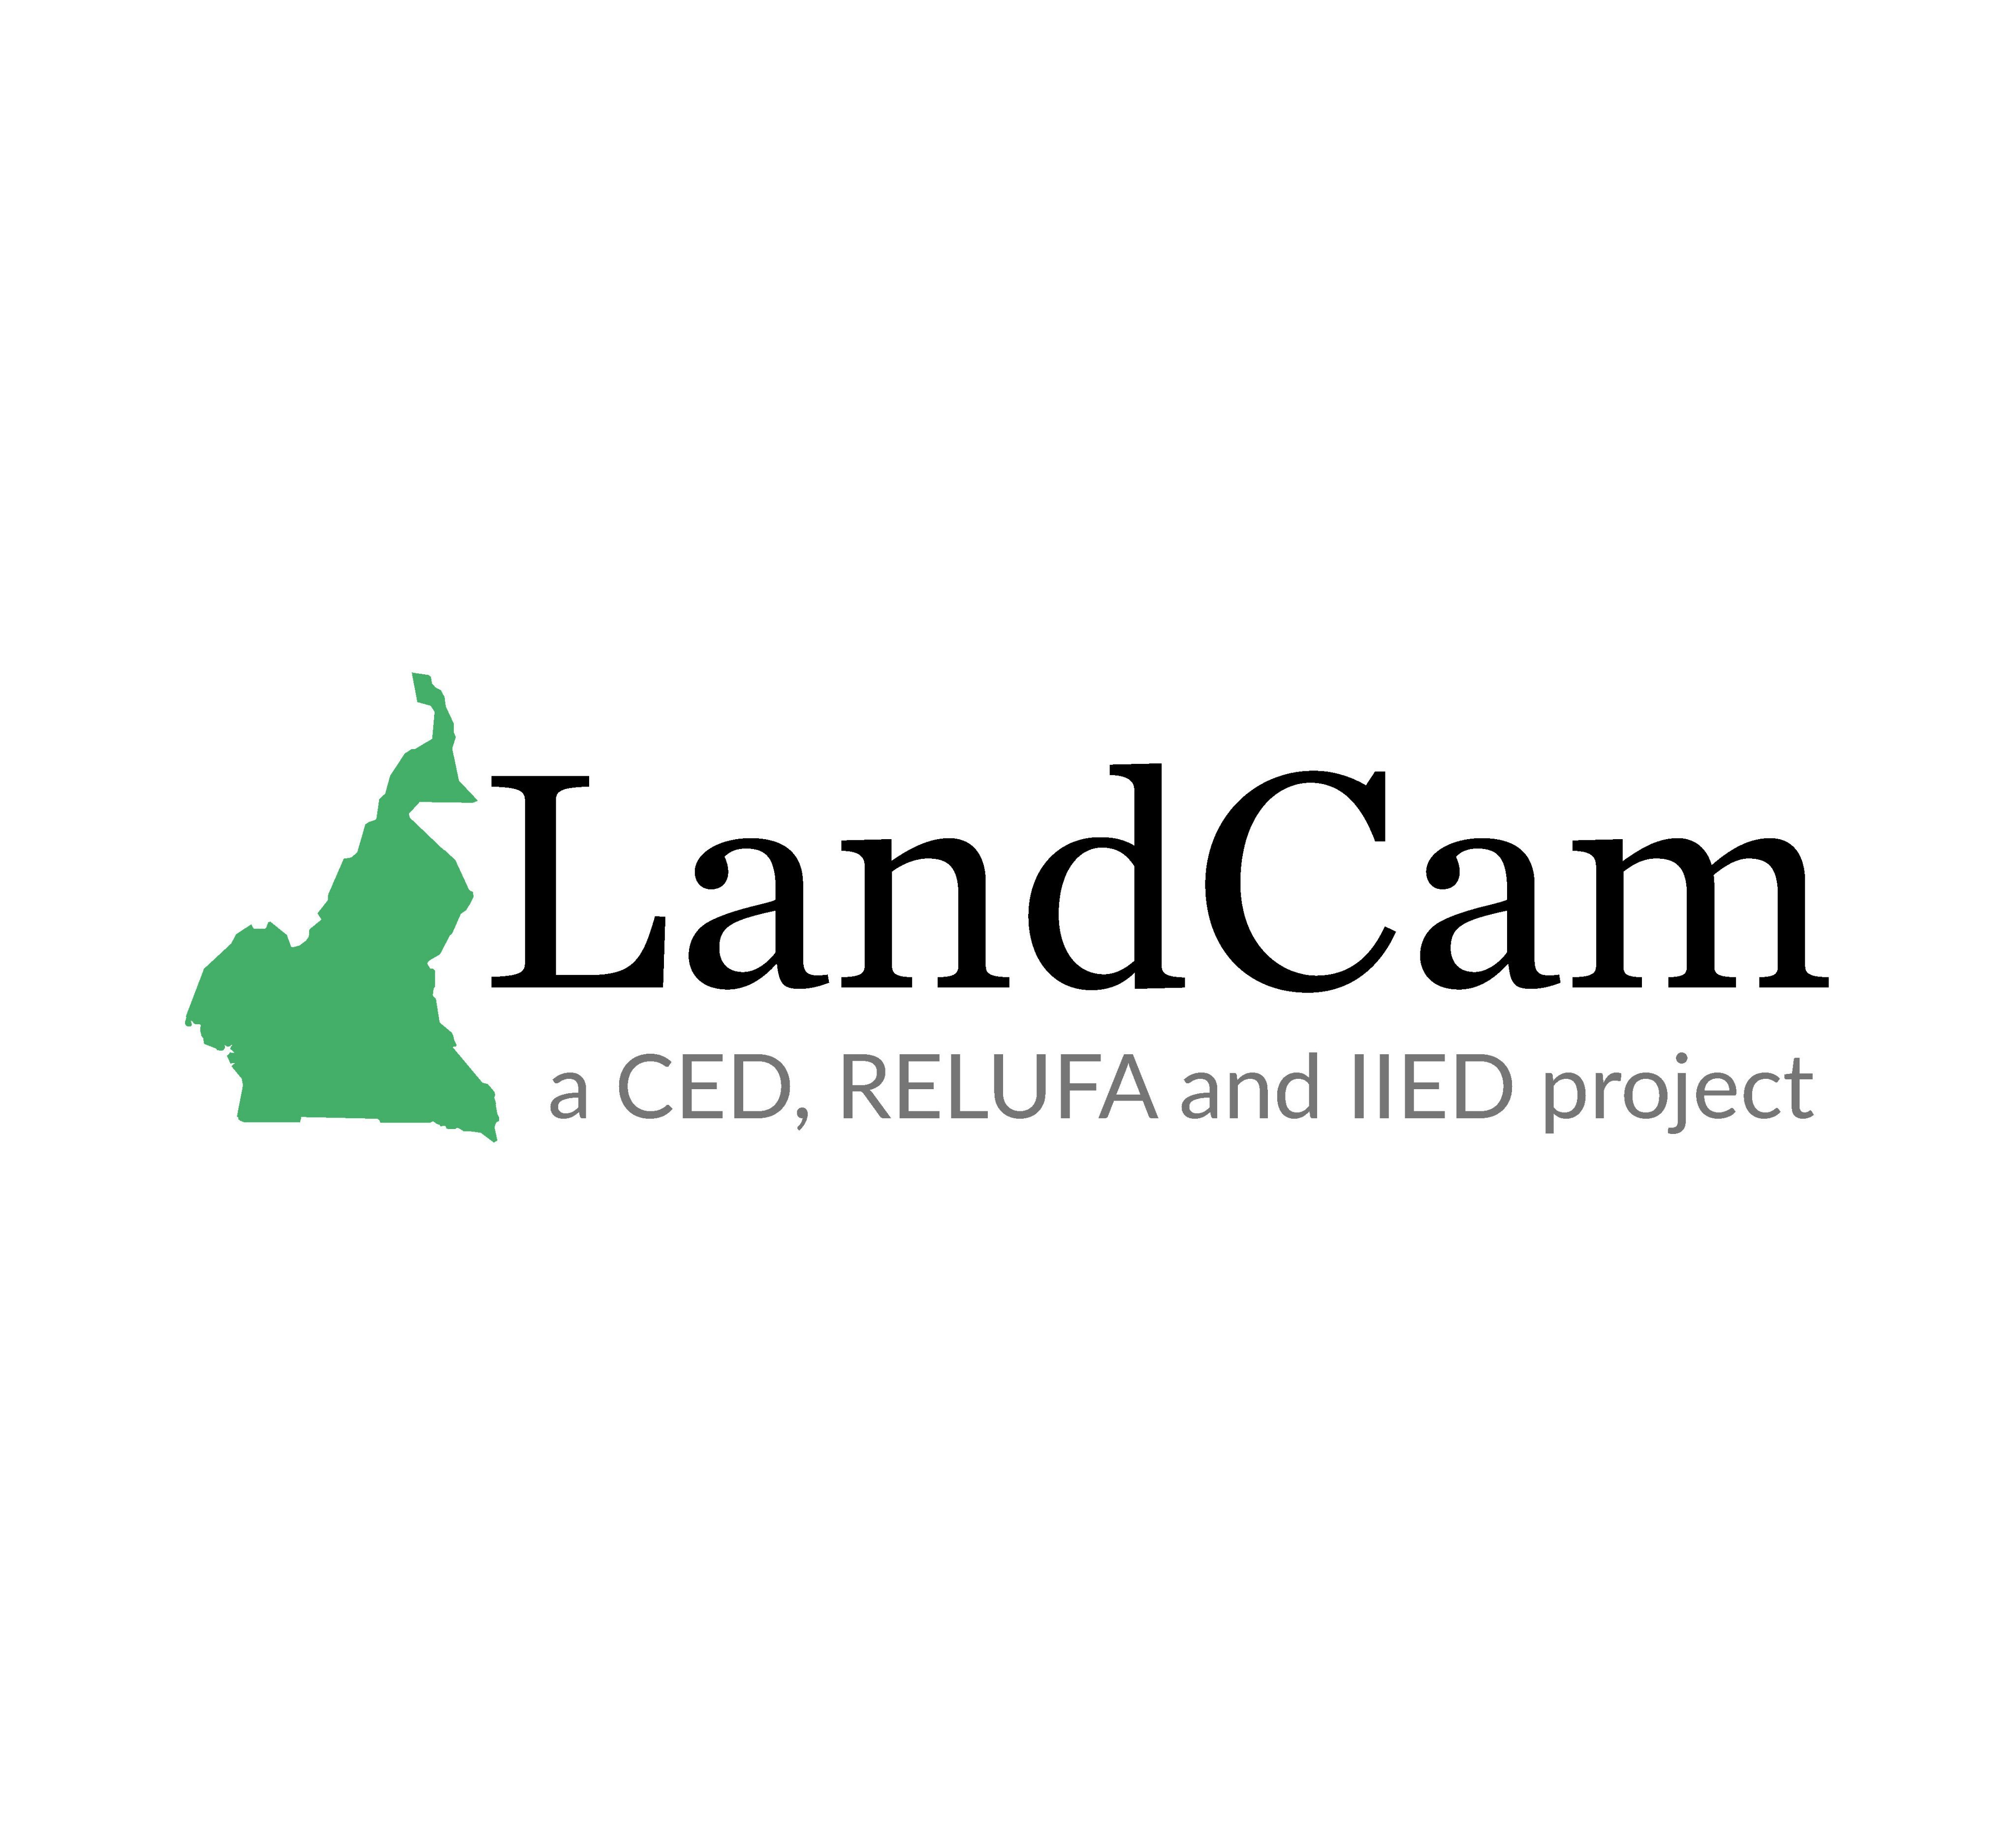 Securing land and resource rights and improving governance in Cameroon. LandCam is implemented by CED, RELUFA and IIED.
https://t.co/OZuSvsI09S